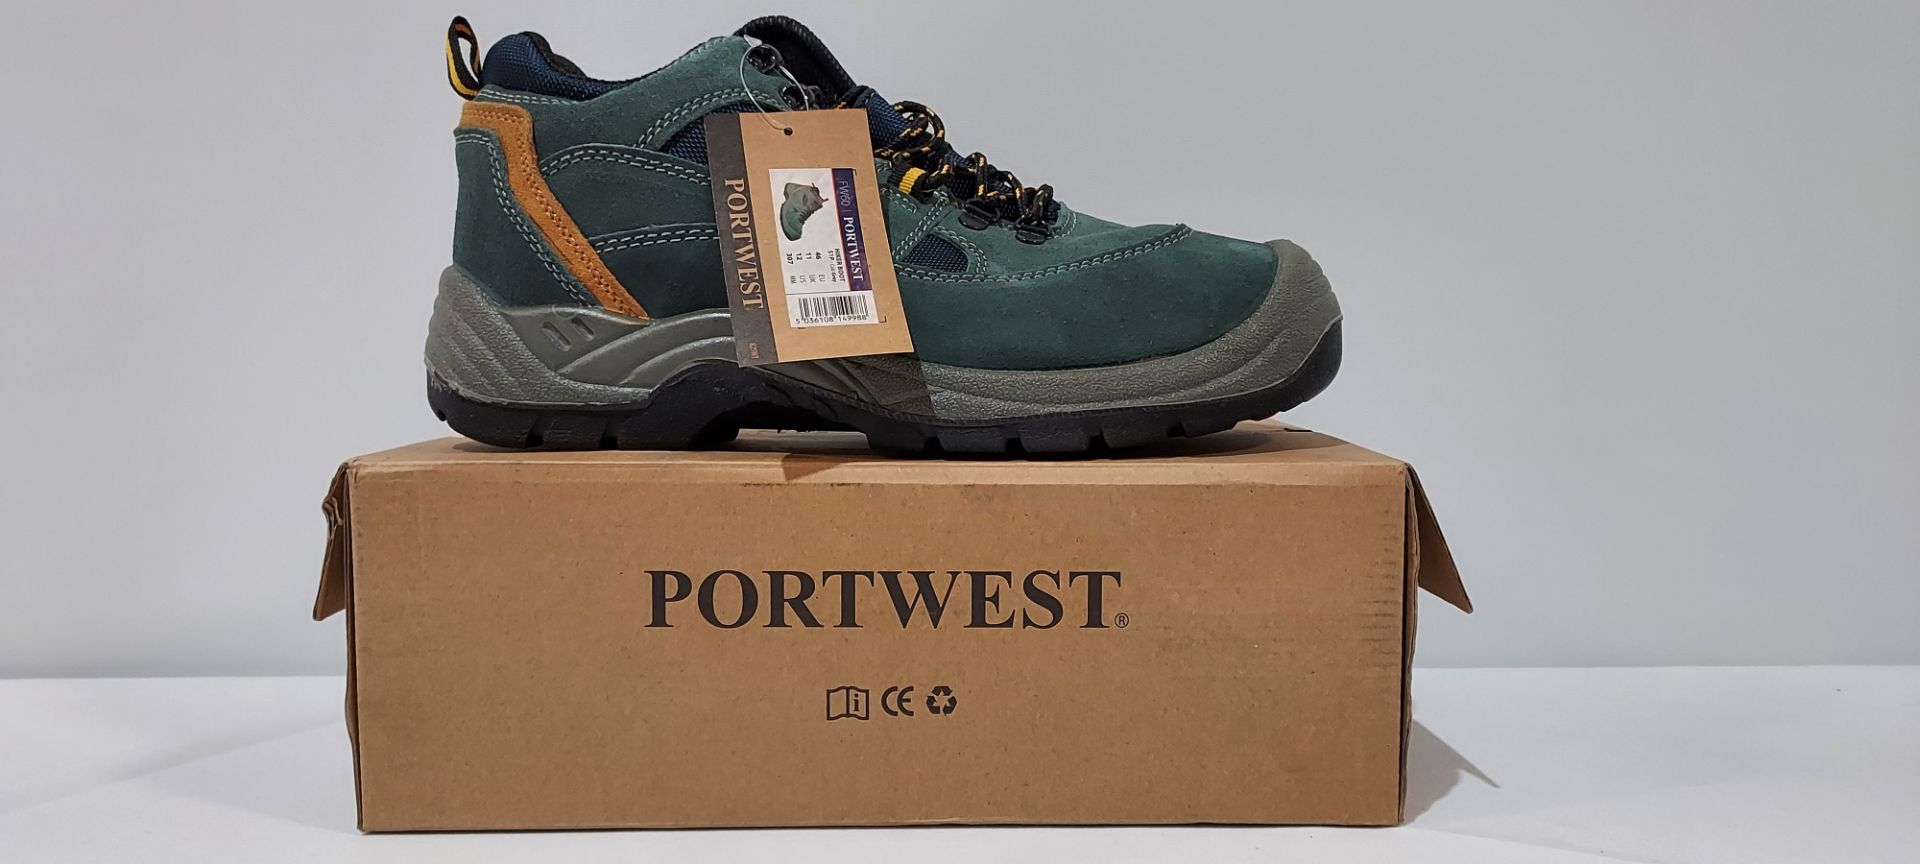 21 X BRAND NEW IN BOX PAIRS OF PORTWEST HIKER BOOTS 18 IN SIZE 9 AND 3 IN SIZE 11